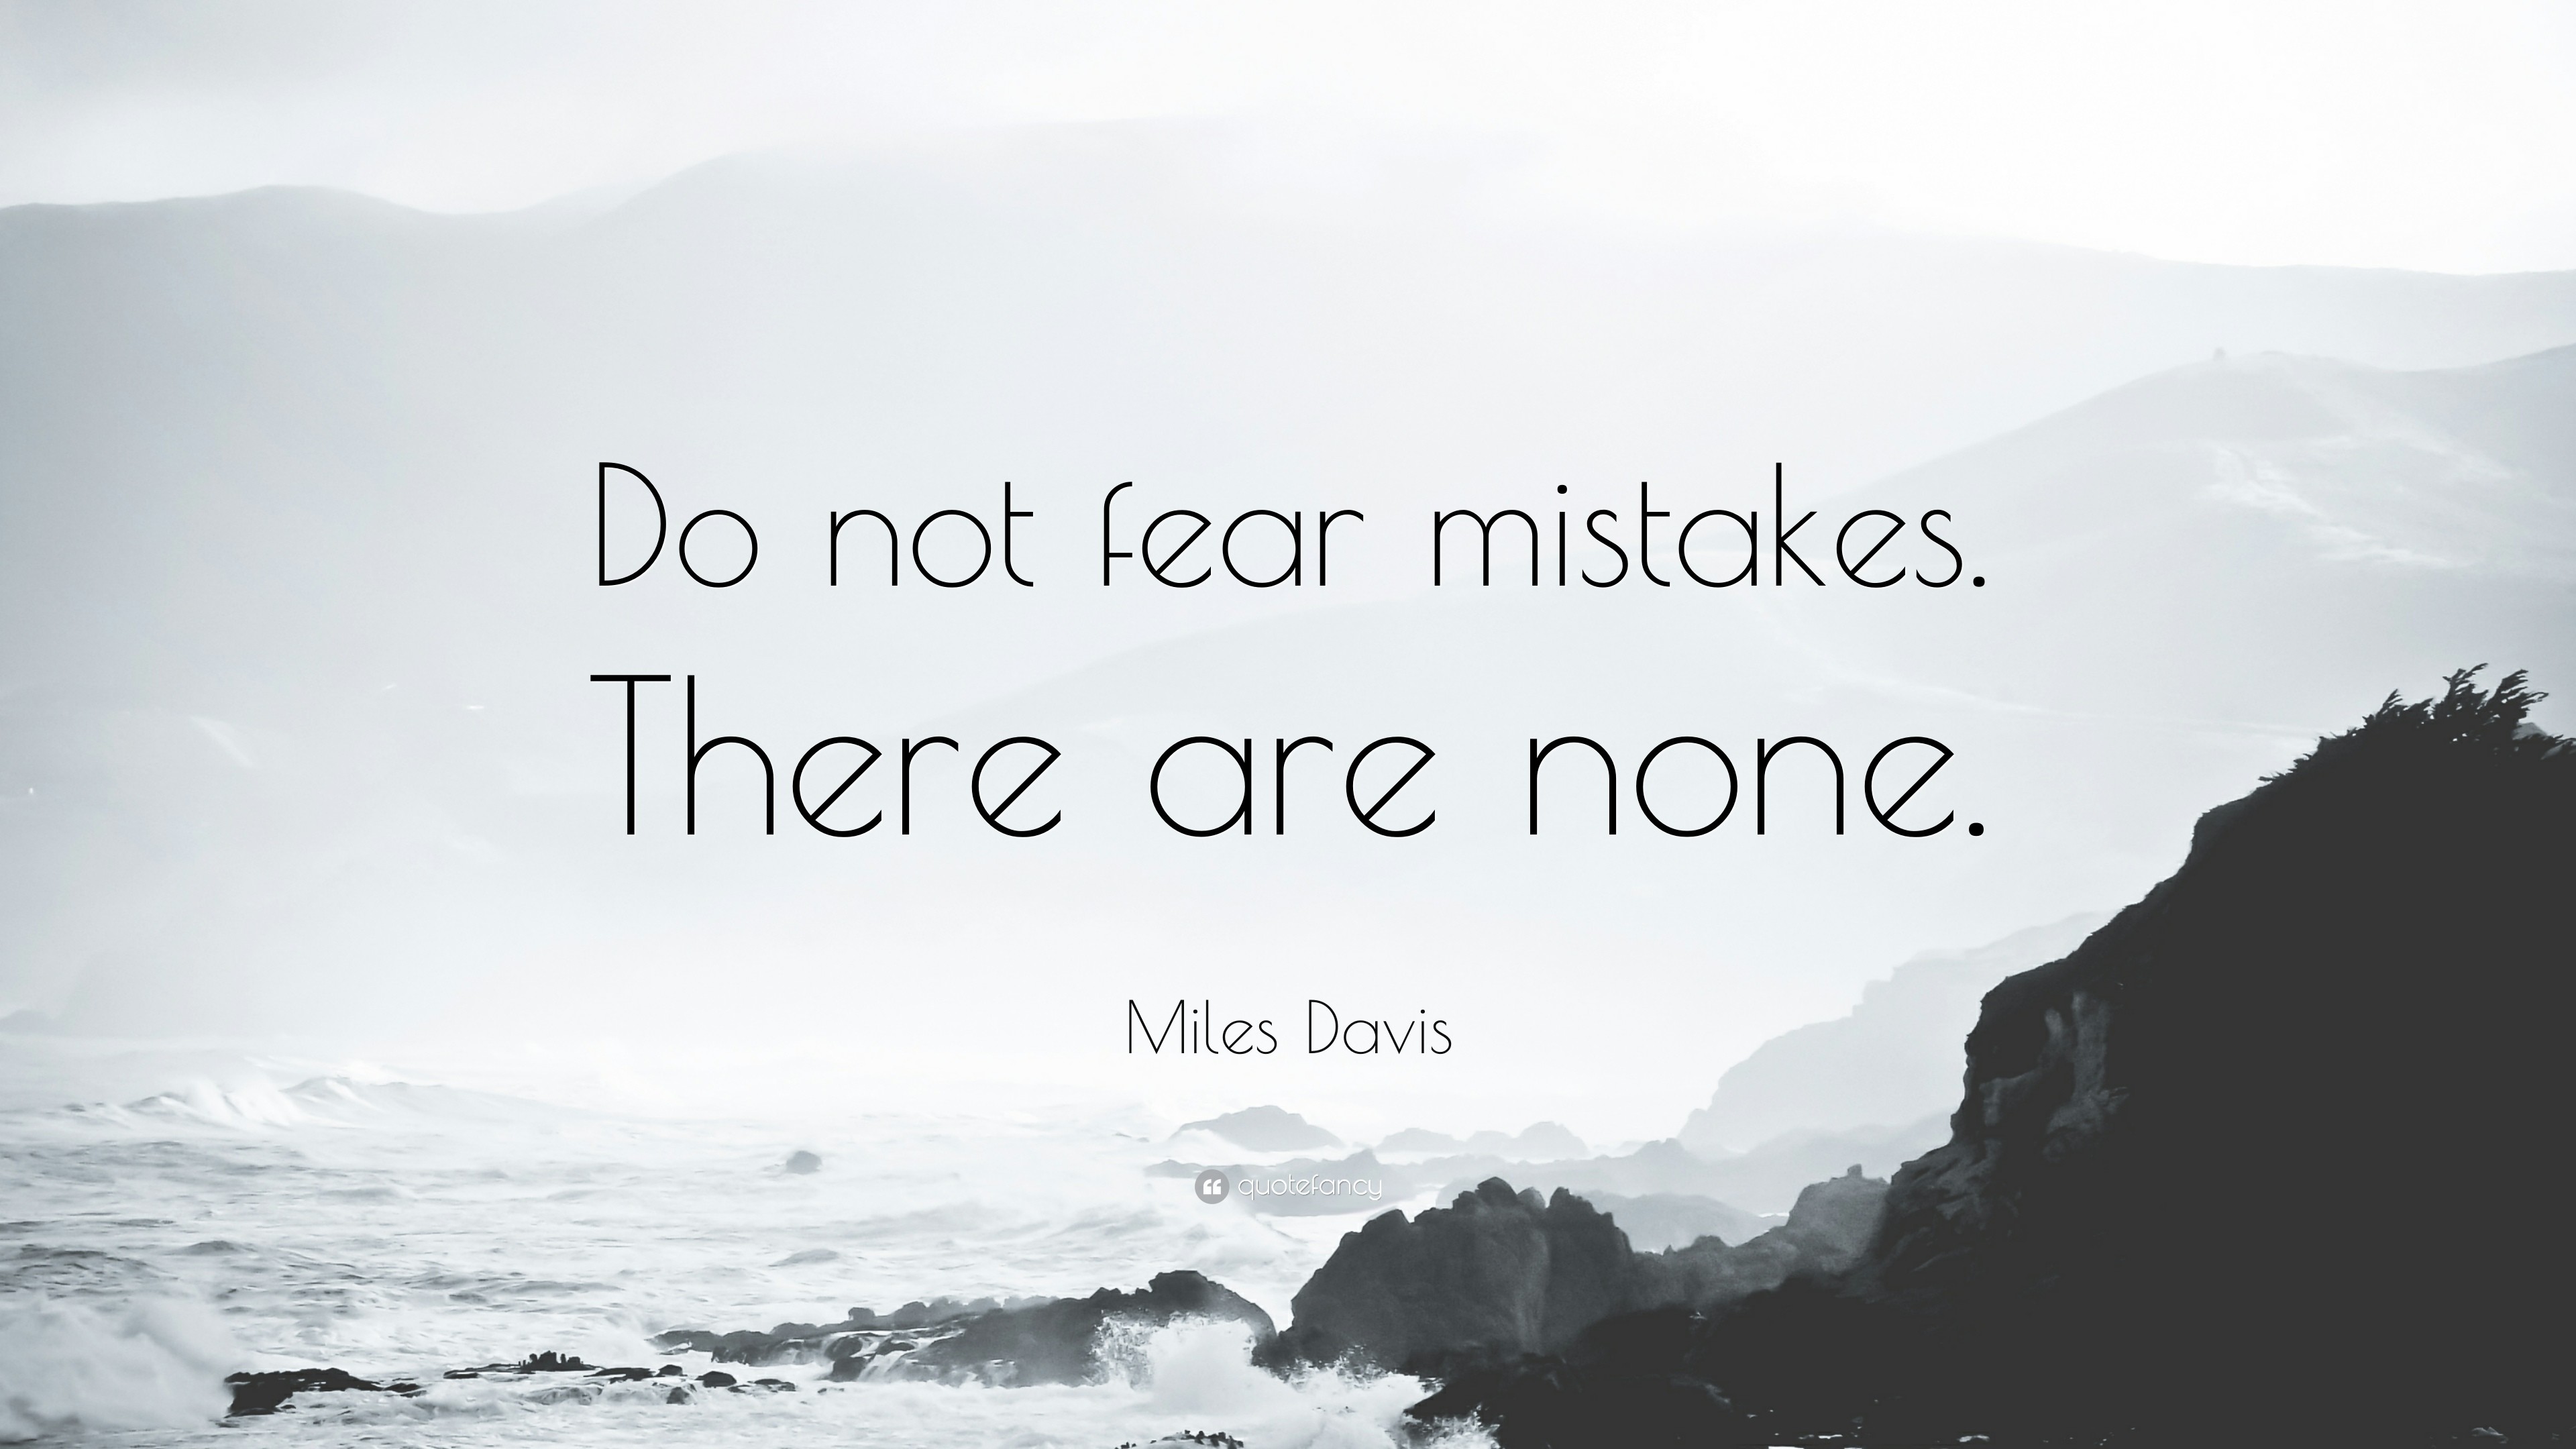 3840x2160 Miles Davis Quote: “Do not fear mistakes. There are none.”